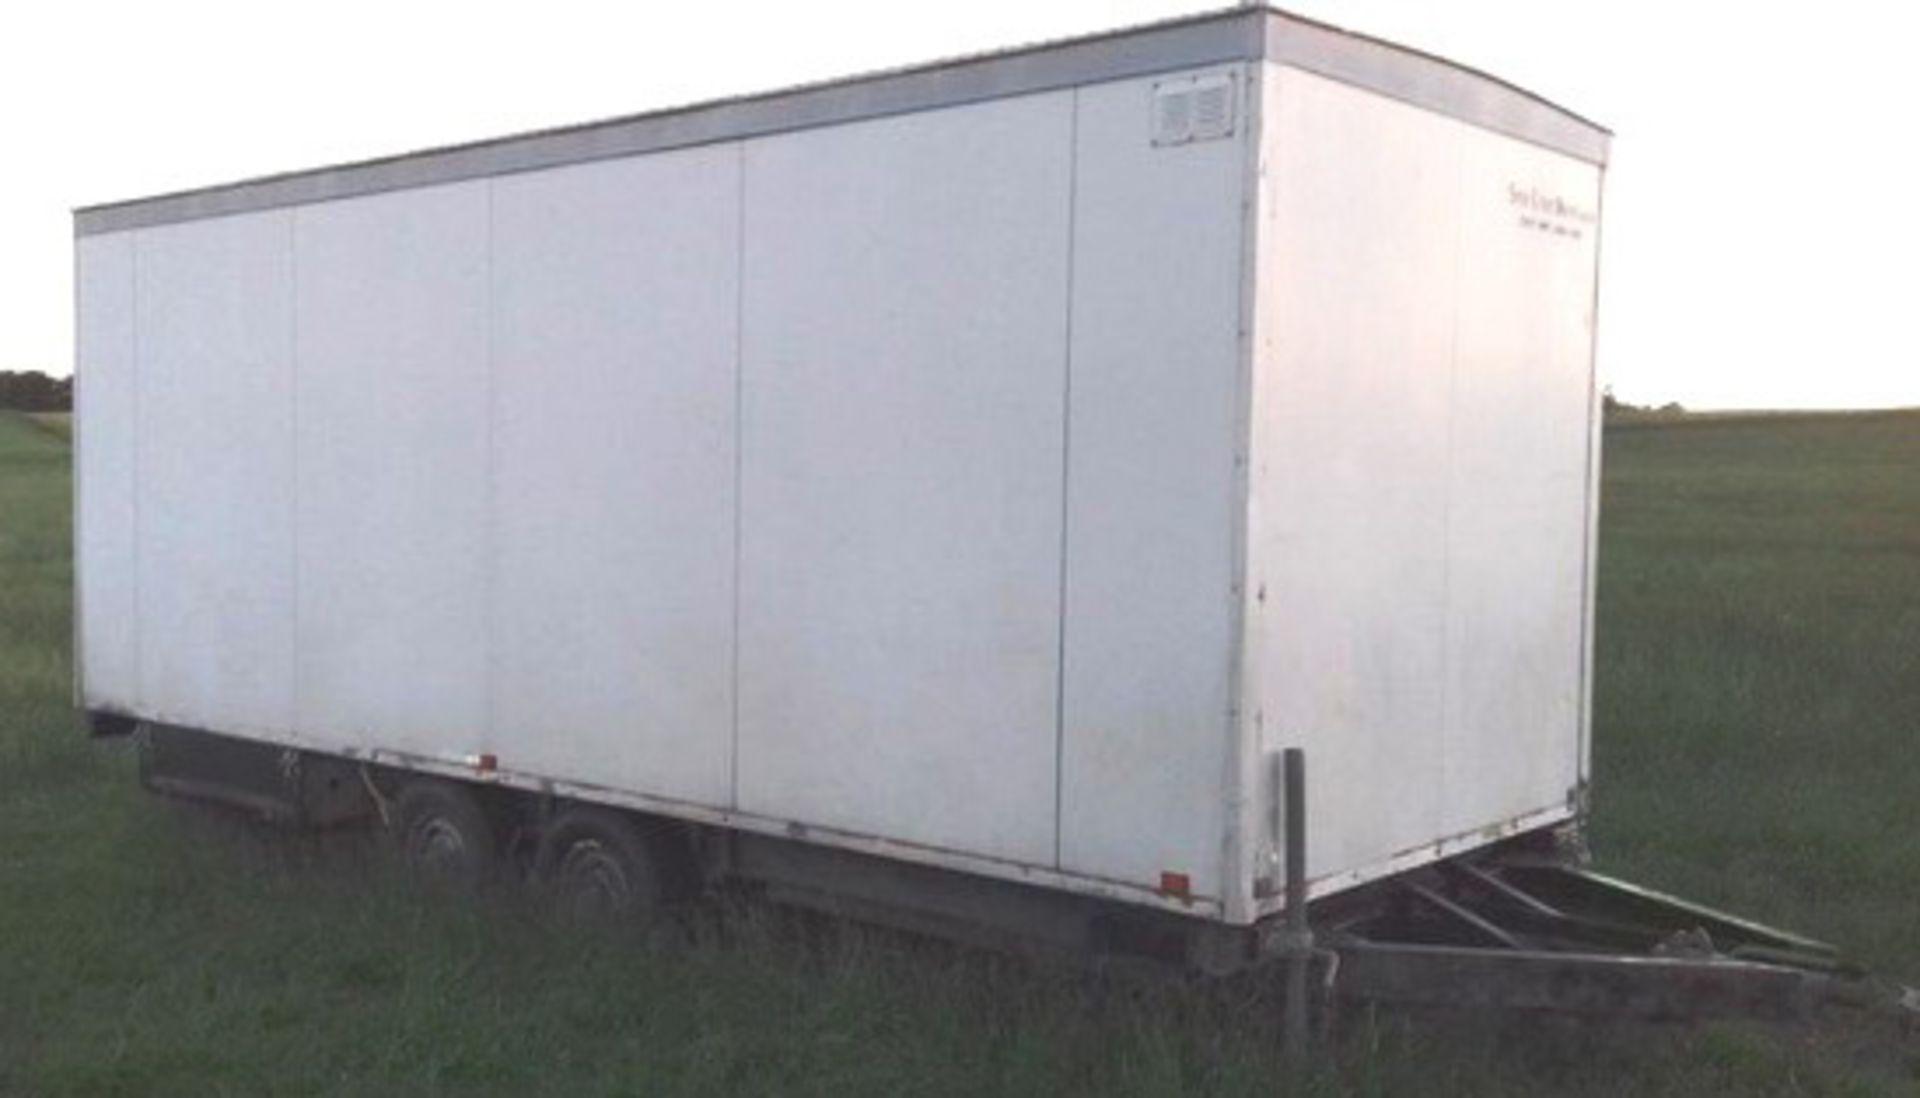 Event hire mobile toilet block c/w 1996 roll-a-long 20' x 7' trailer on springs. Fully equipped for - Bild 3 aus 9